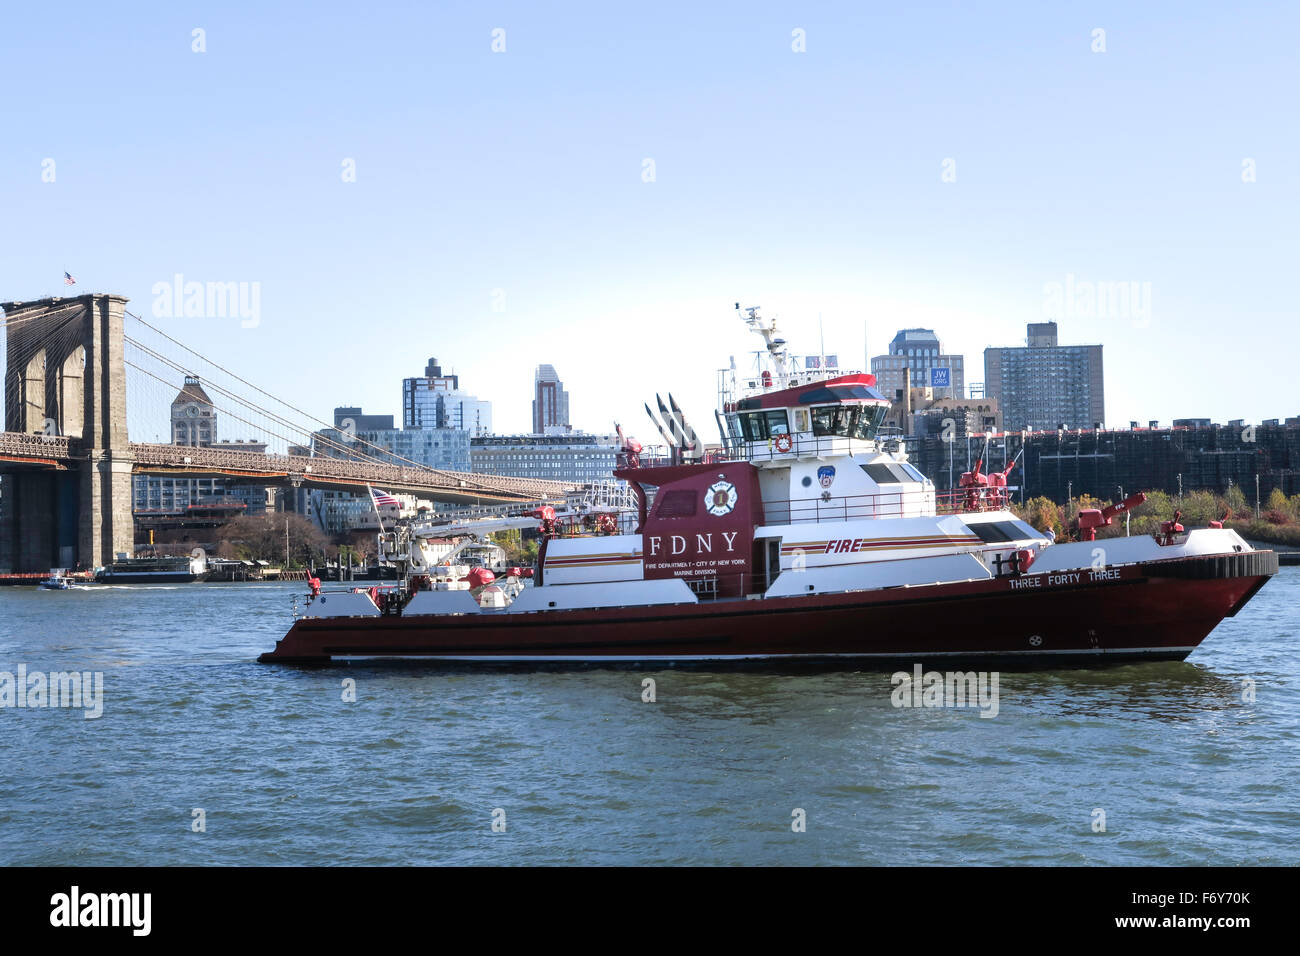 FDNY Boat on the East River, NYC, USA Stock Photo